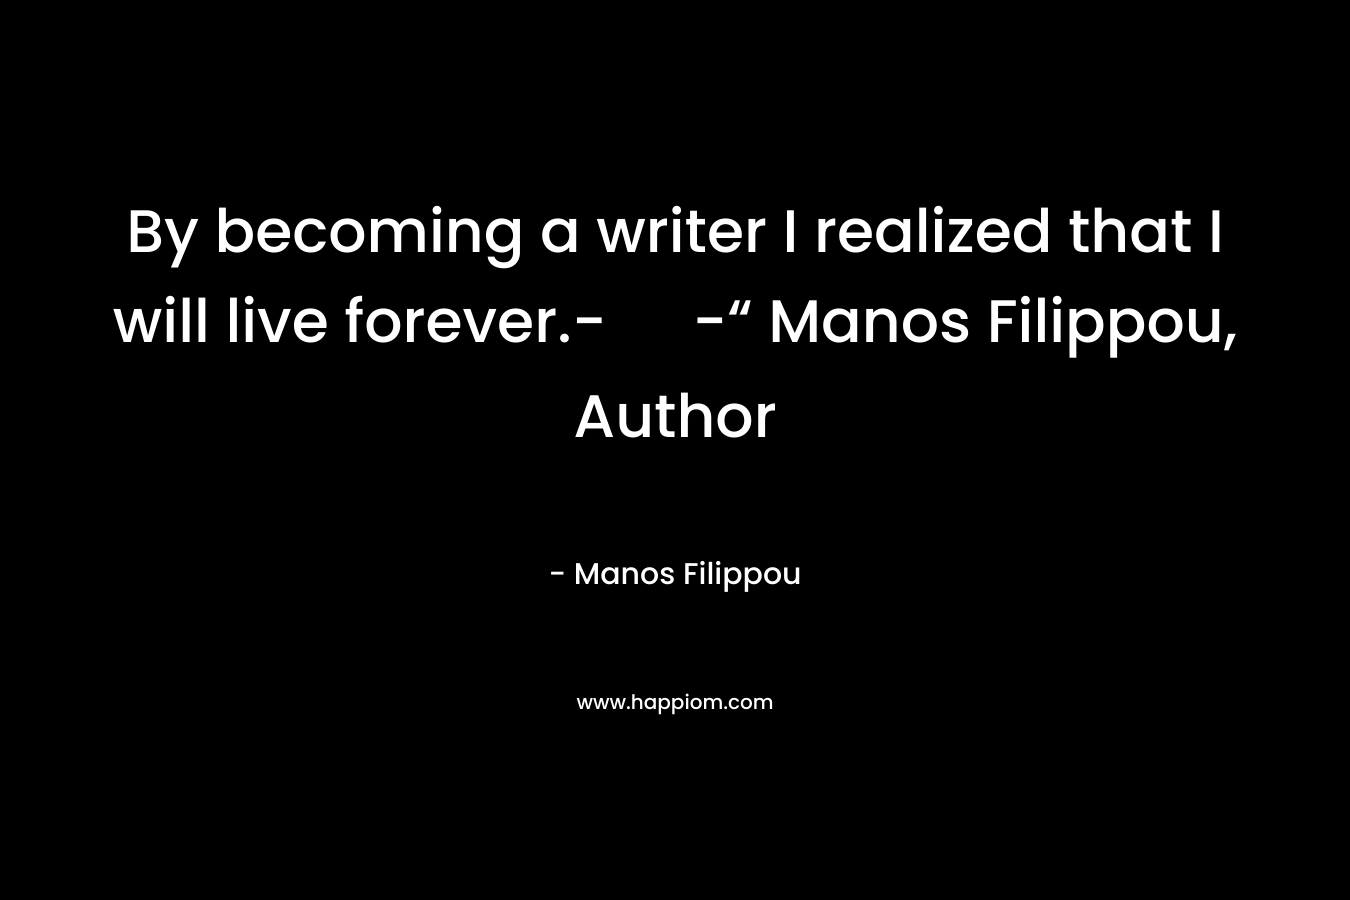 By becoming a writer I realized that I will live forever.- -“ Manos Filippou, Author – Manos Filippou